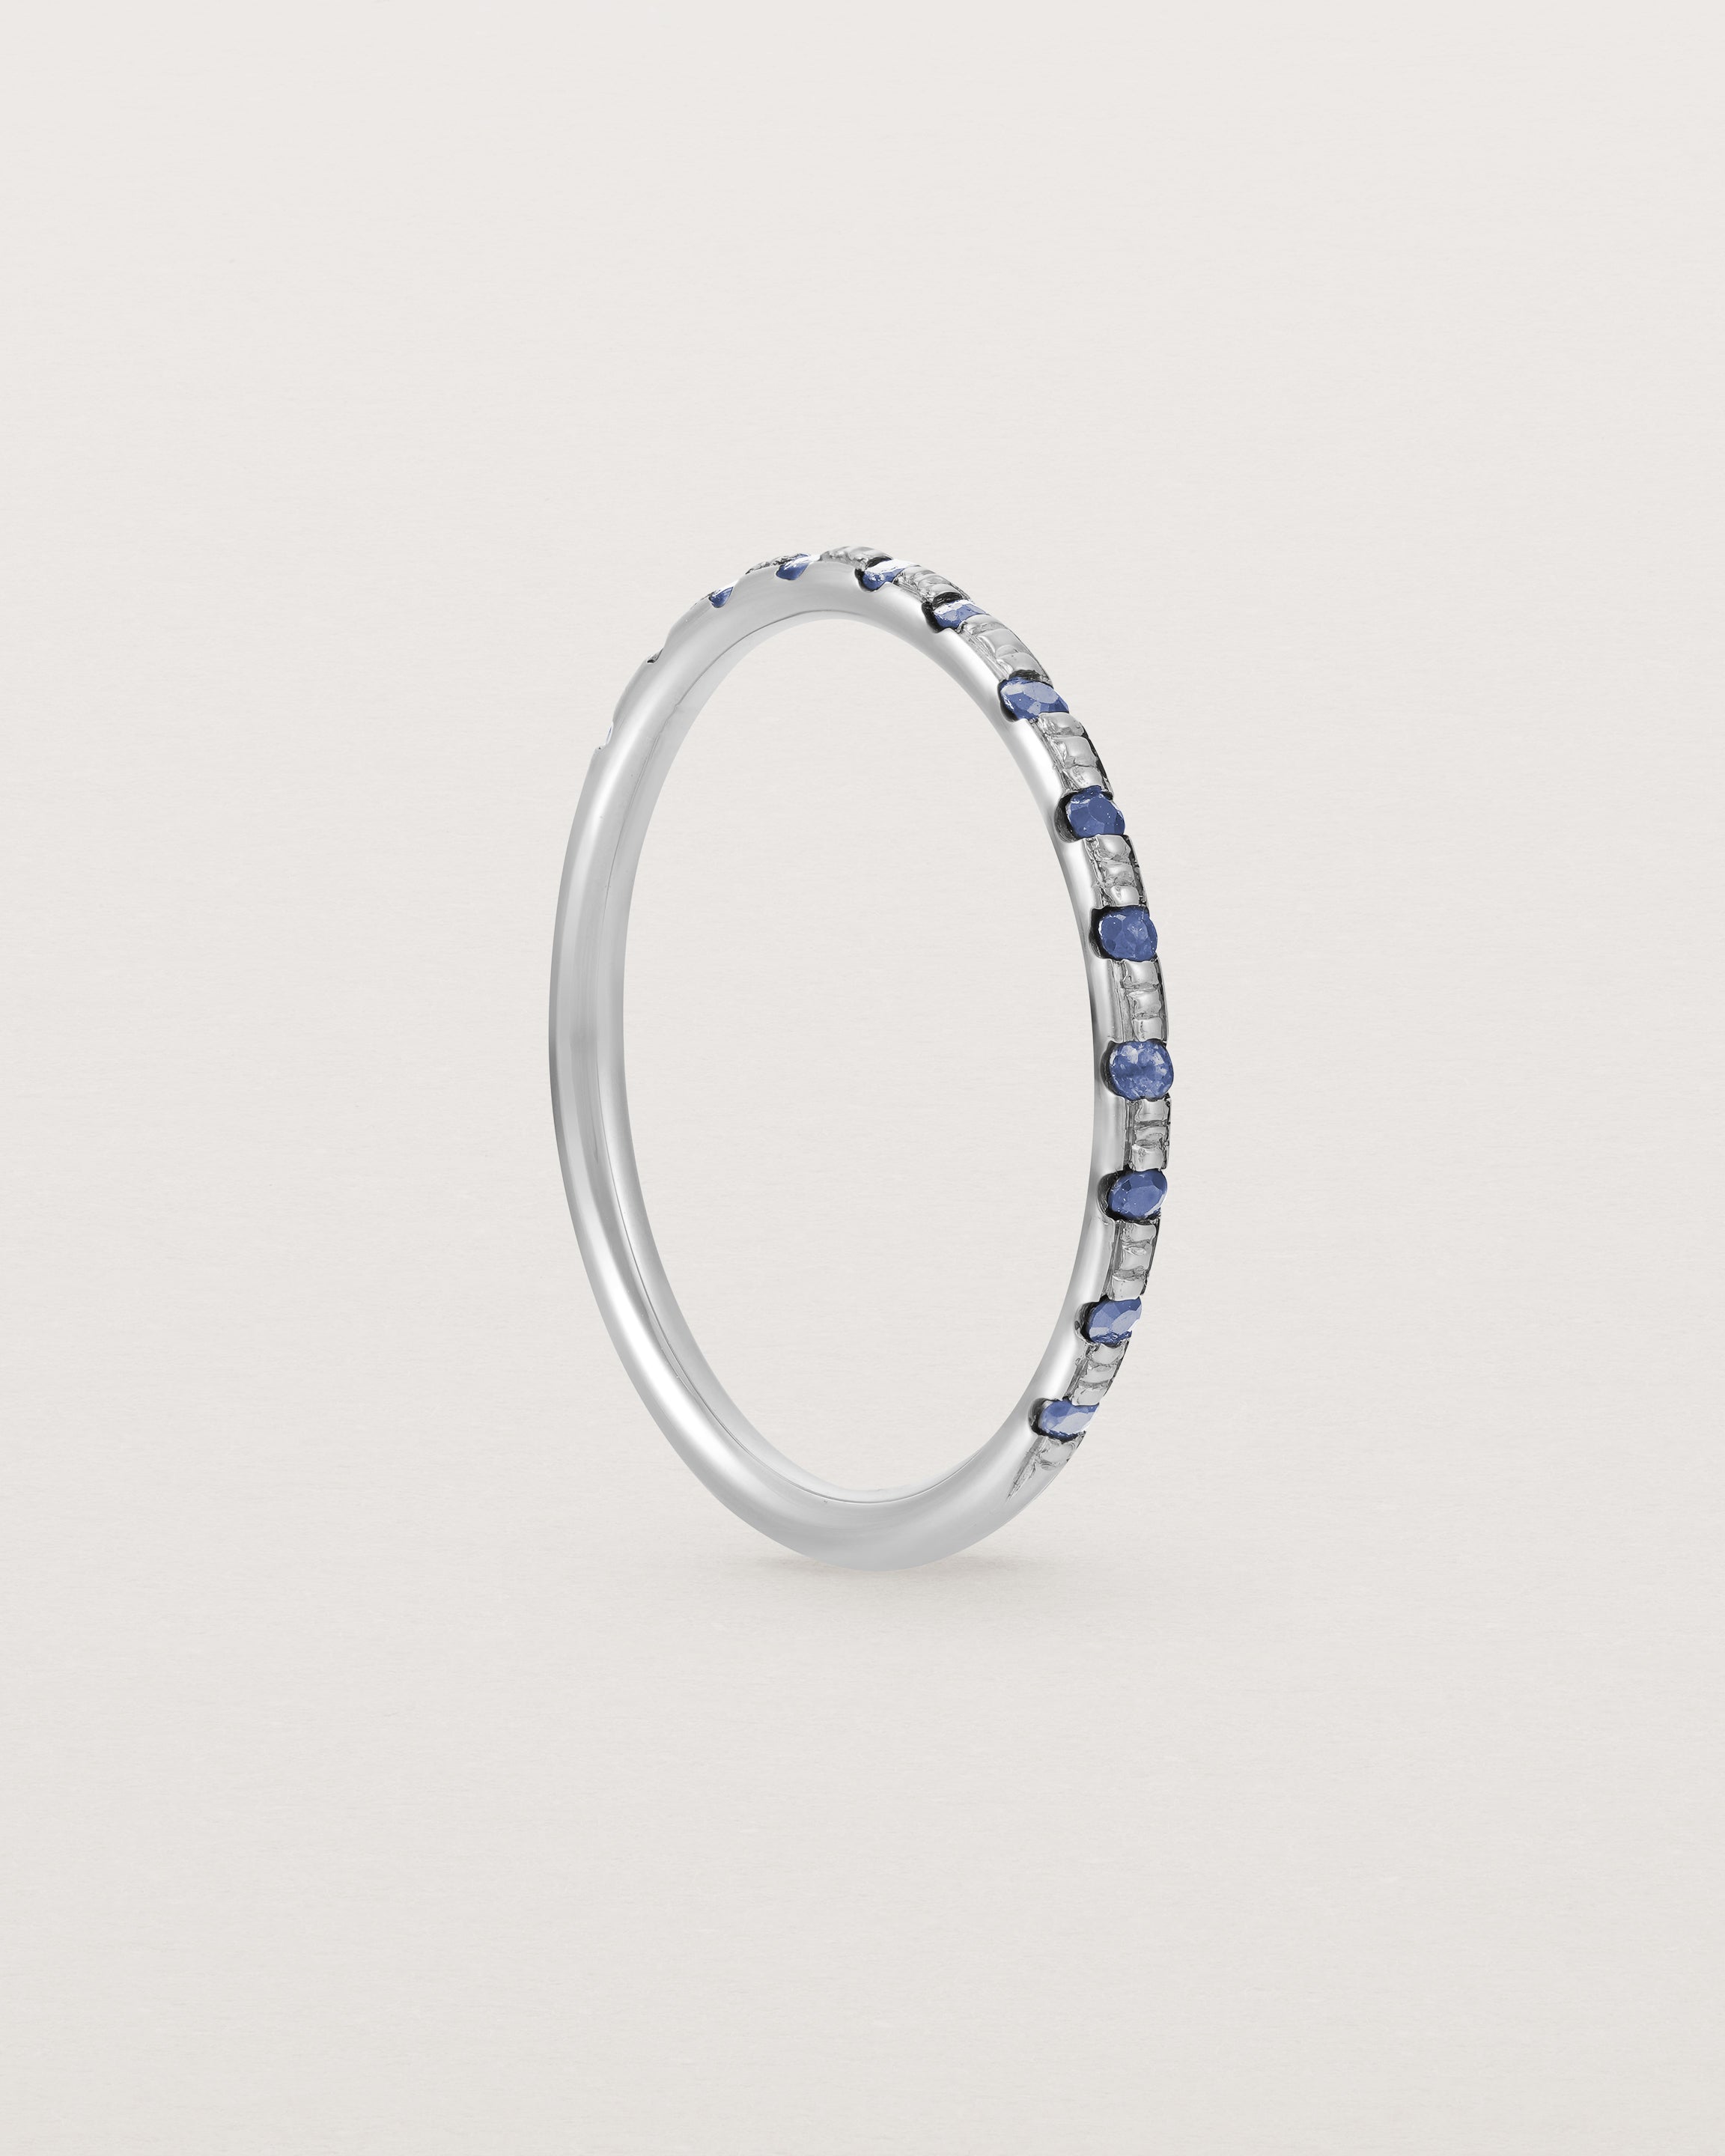 Standing View of Cascade Round Profile Wedding Ring | Sapphire | White Gold 